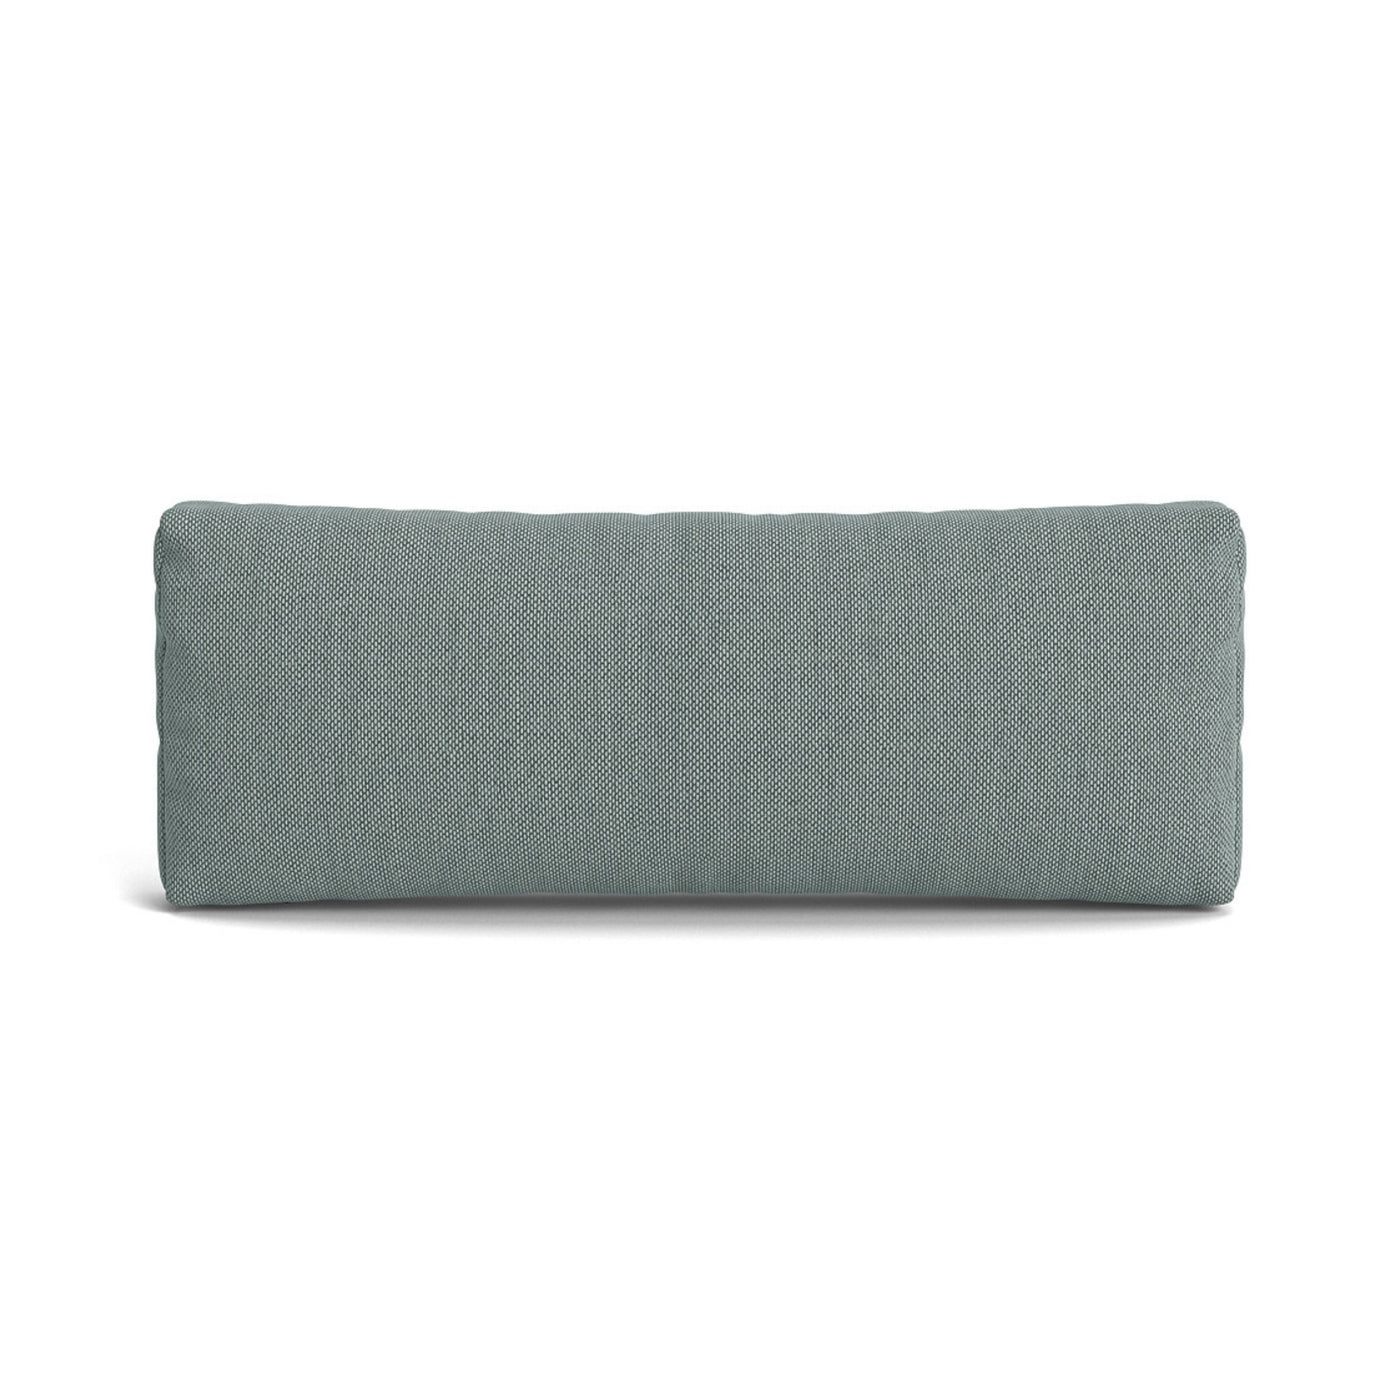 Muuto Connect Soft Modular Sofa Cushion. Shop online at someday designs. #colour_re-wool-868